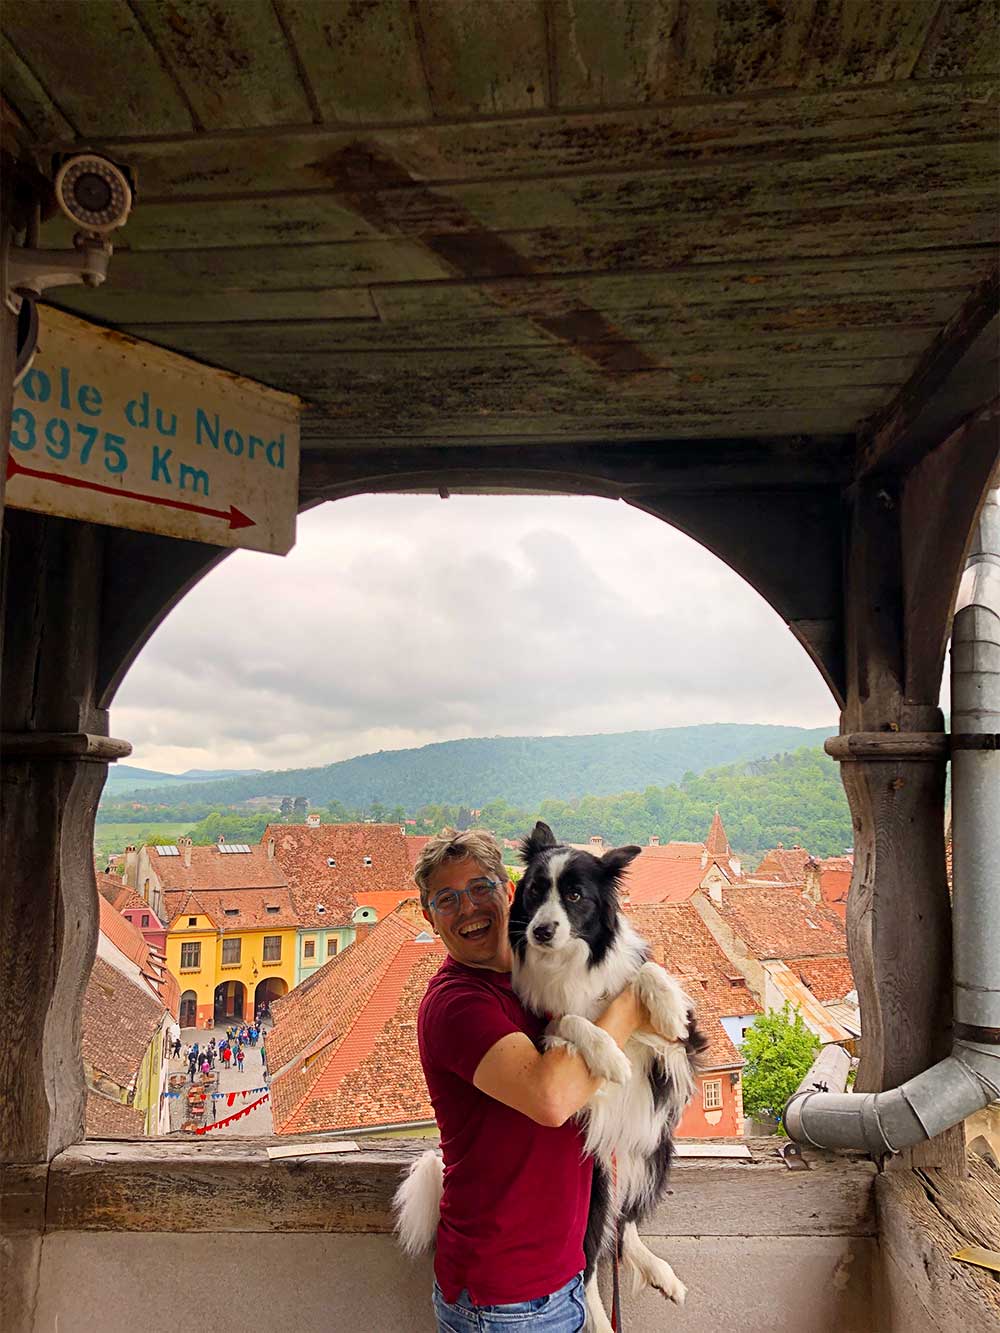 Pedro and Rafa on a balcony with a view of the city of Sighisoara.